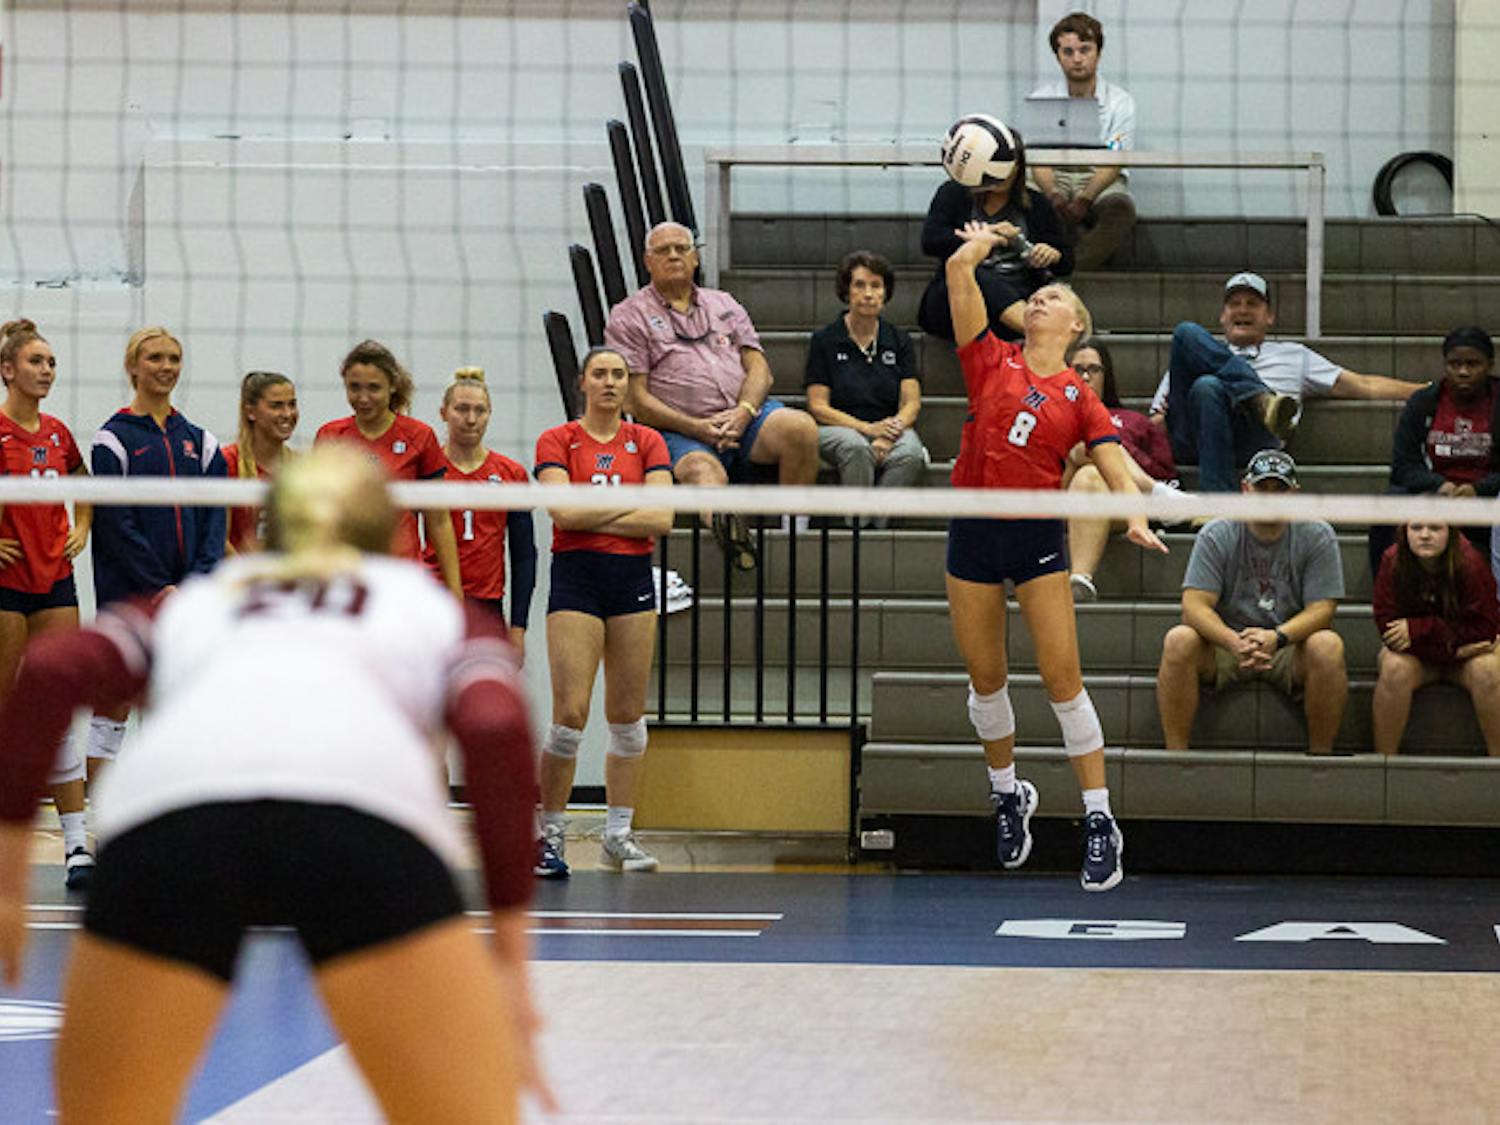 Ole Miss senior libero Maggie Miller serves the ball during the match against South Carolina on Nov. 5, 2022. Ole Miss beat South Carolina 3-1.&nbsp;